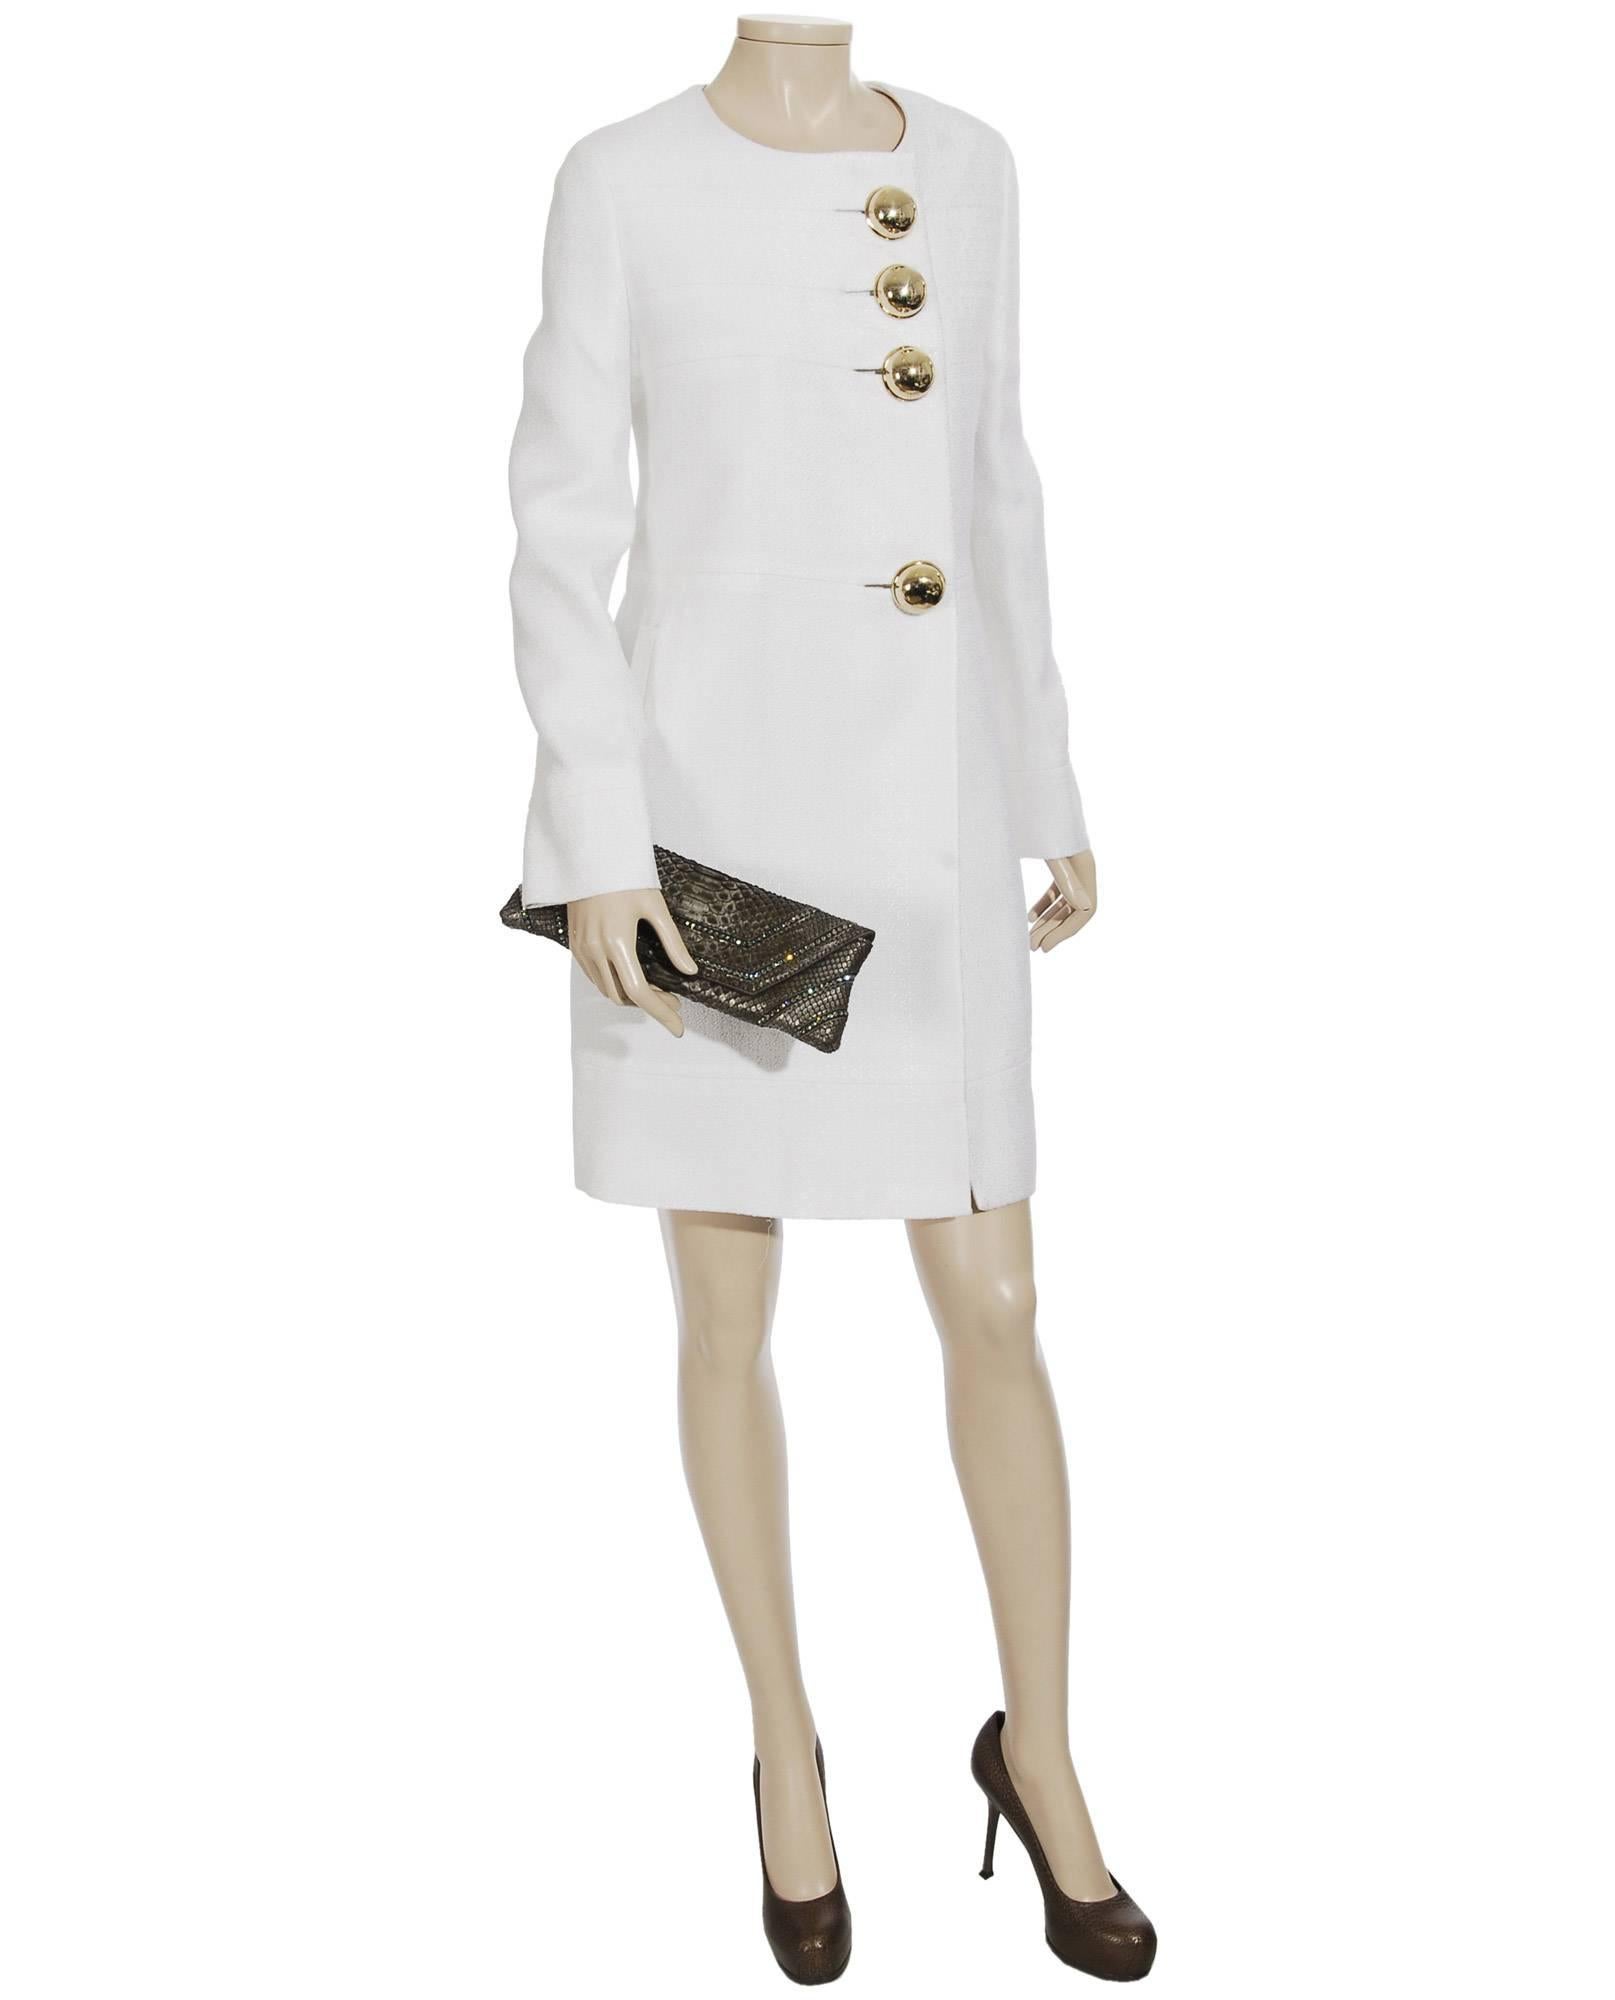  Stunning Versace Coat With XL Button Detail

This beautiful coat is both an absolute IT-PIECE and timeless classic! Dress like British royalty!

DETAILS: 

A great piece made by VERSACE
This gorgeous coat is made out of fine ivory fabric
Huge XL